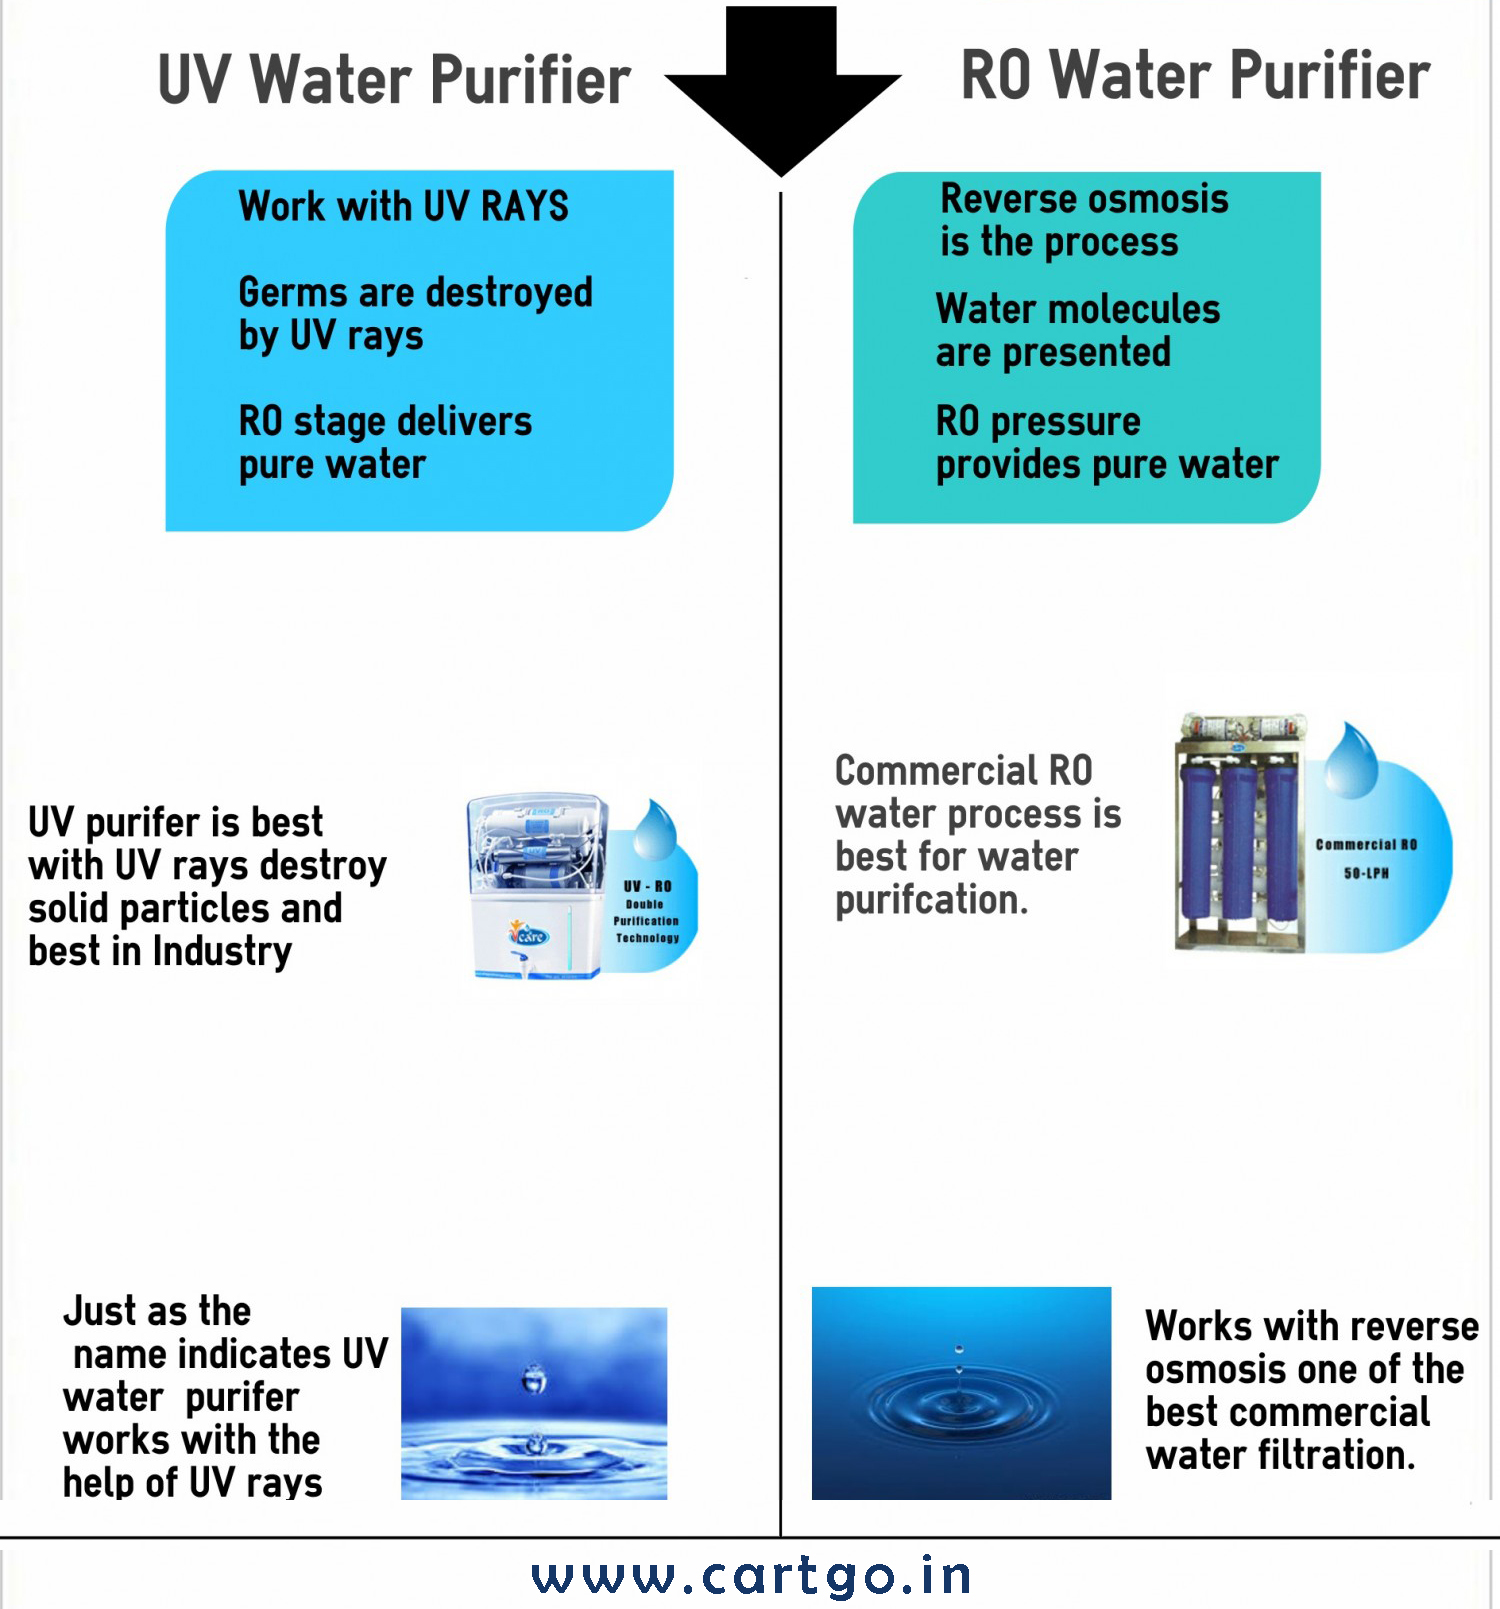 Cartgo - UV vs RO Purification - Which Water Purifier Is Best For You?